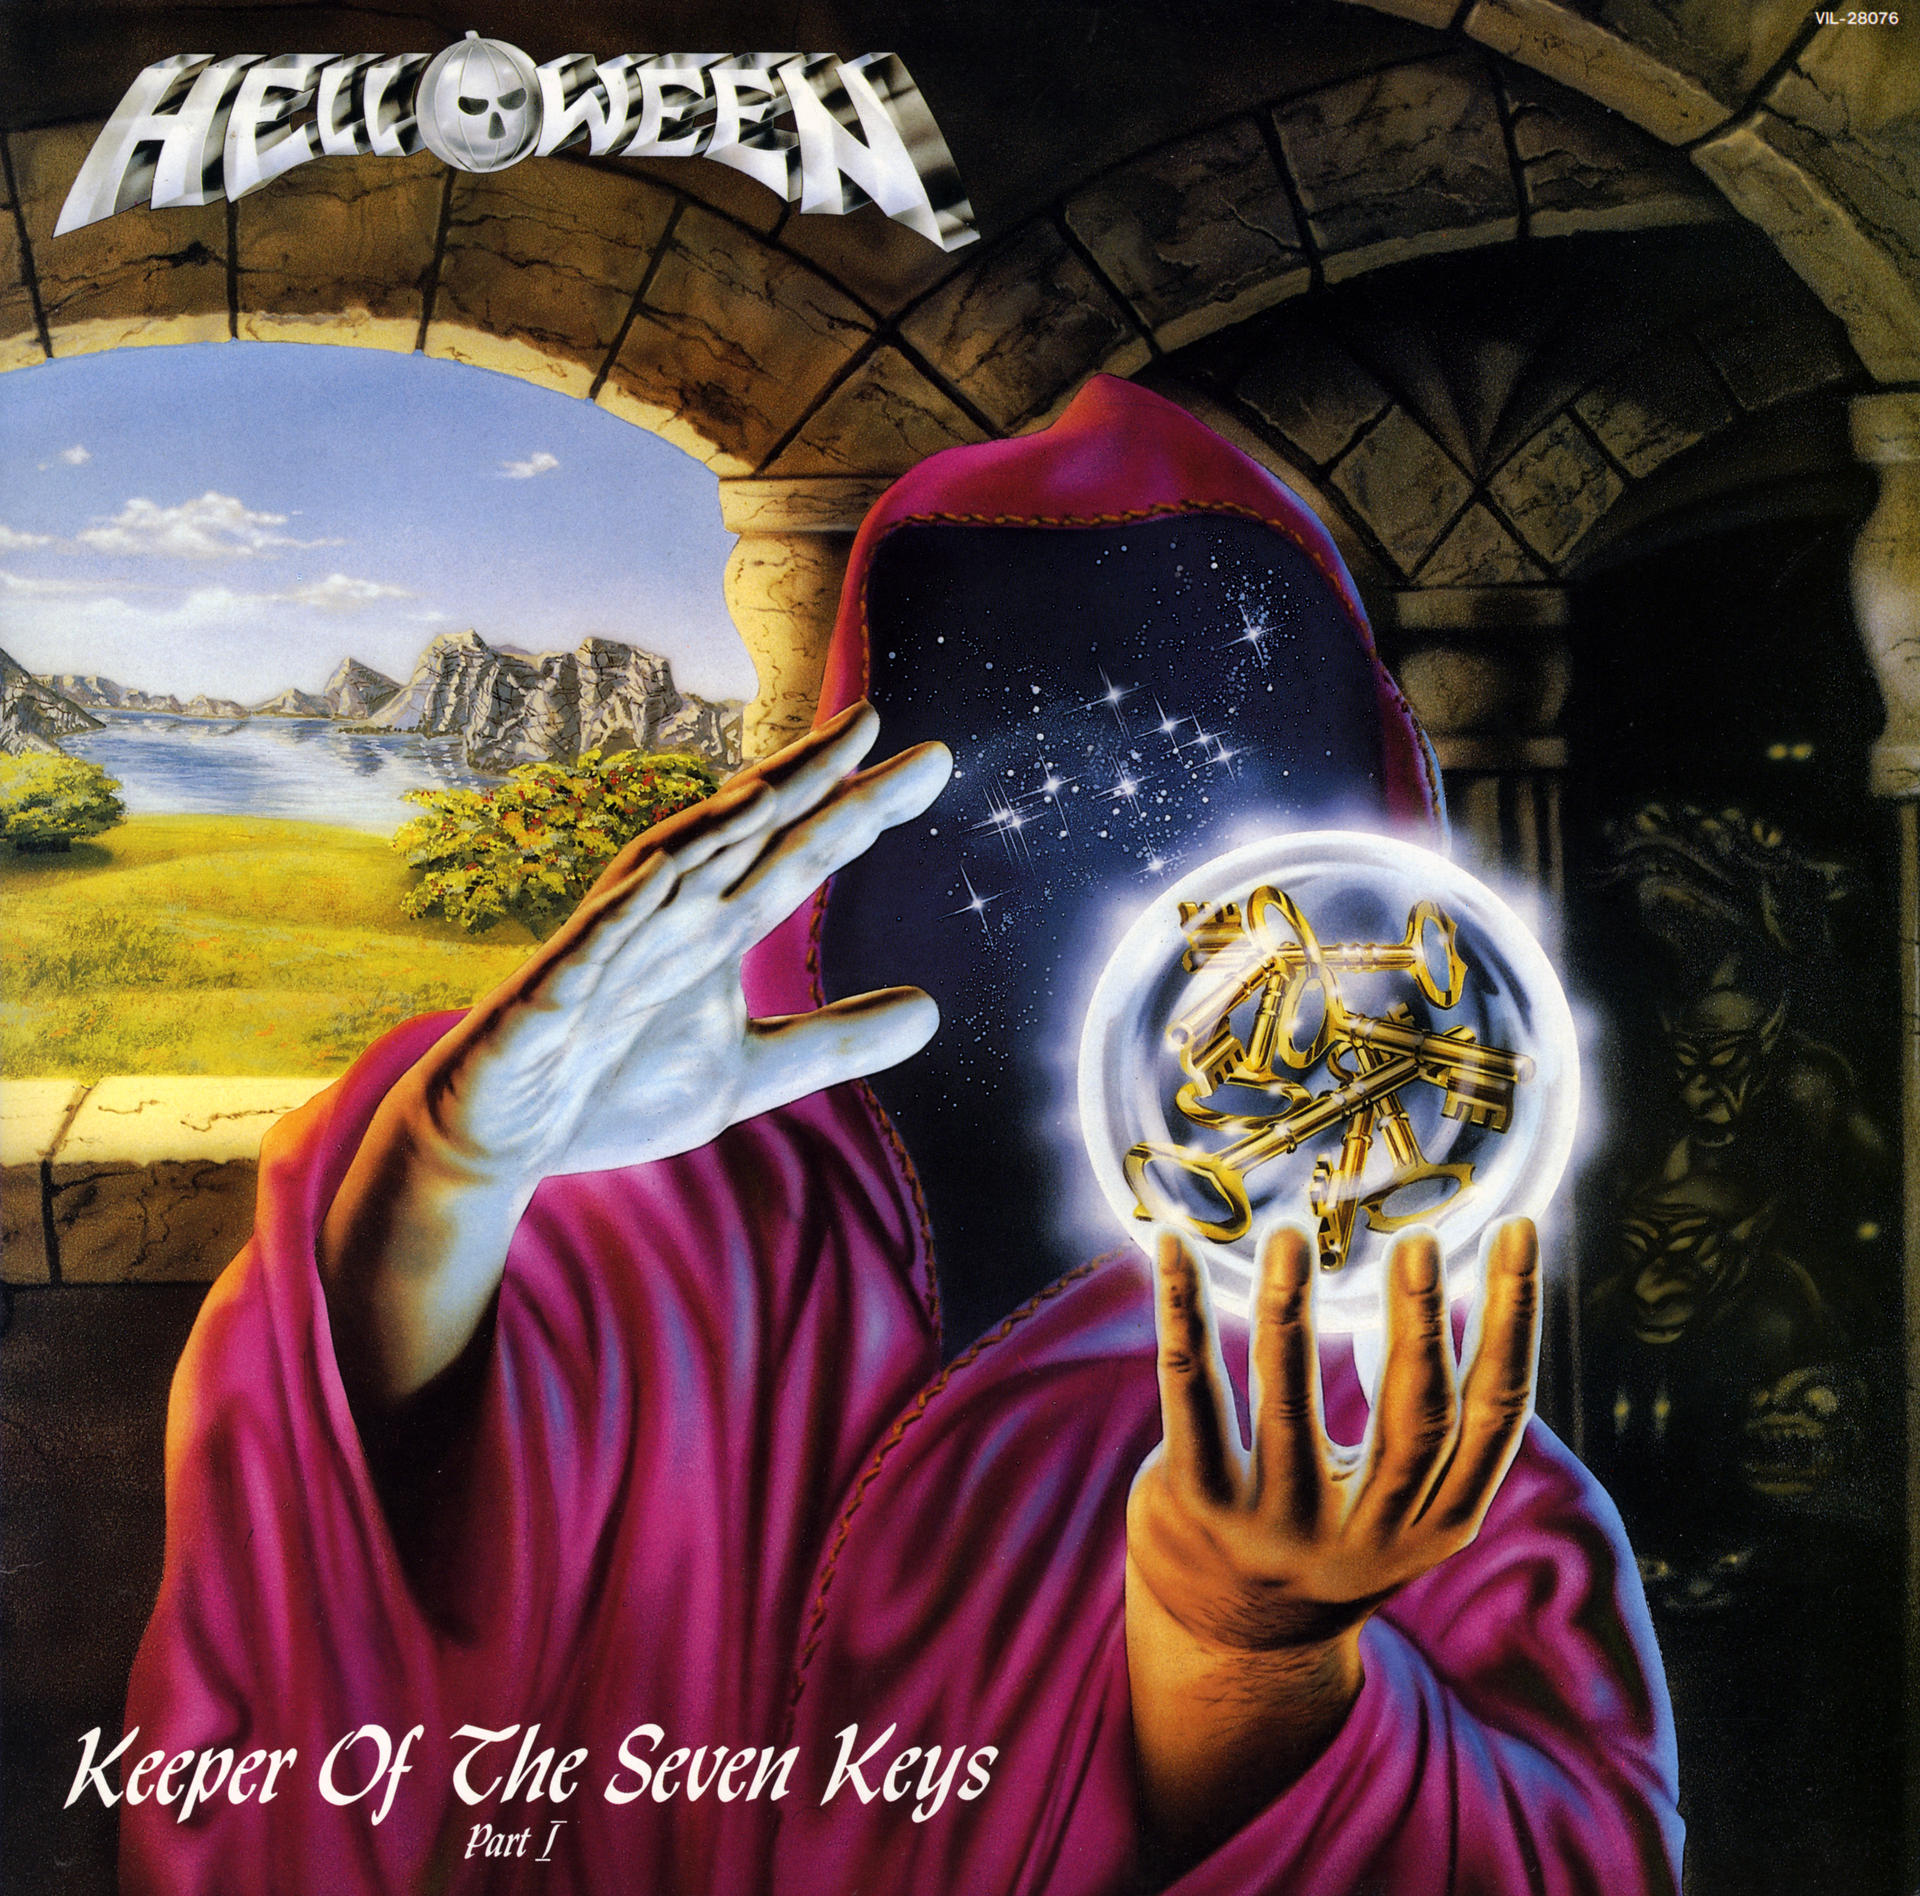 Металл BMG Helloween - Keeper Of The Seven Keys, Part I (Coloured Vinyl LP) the last of us part i pc